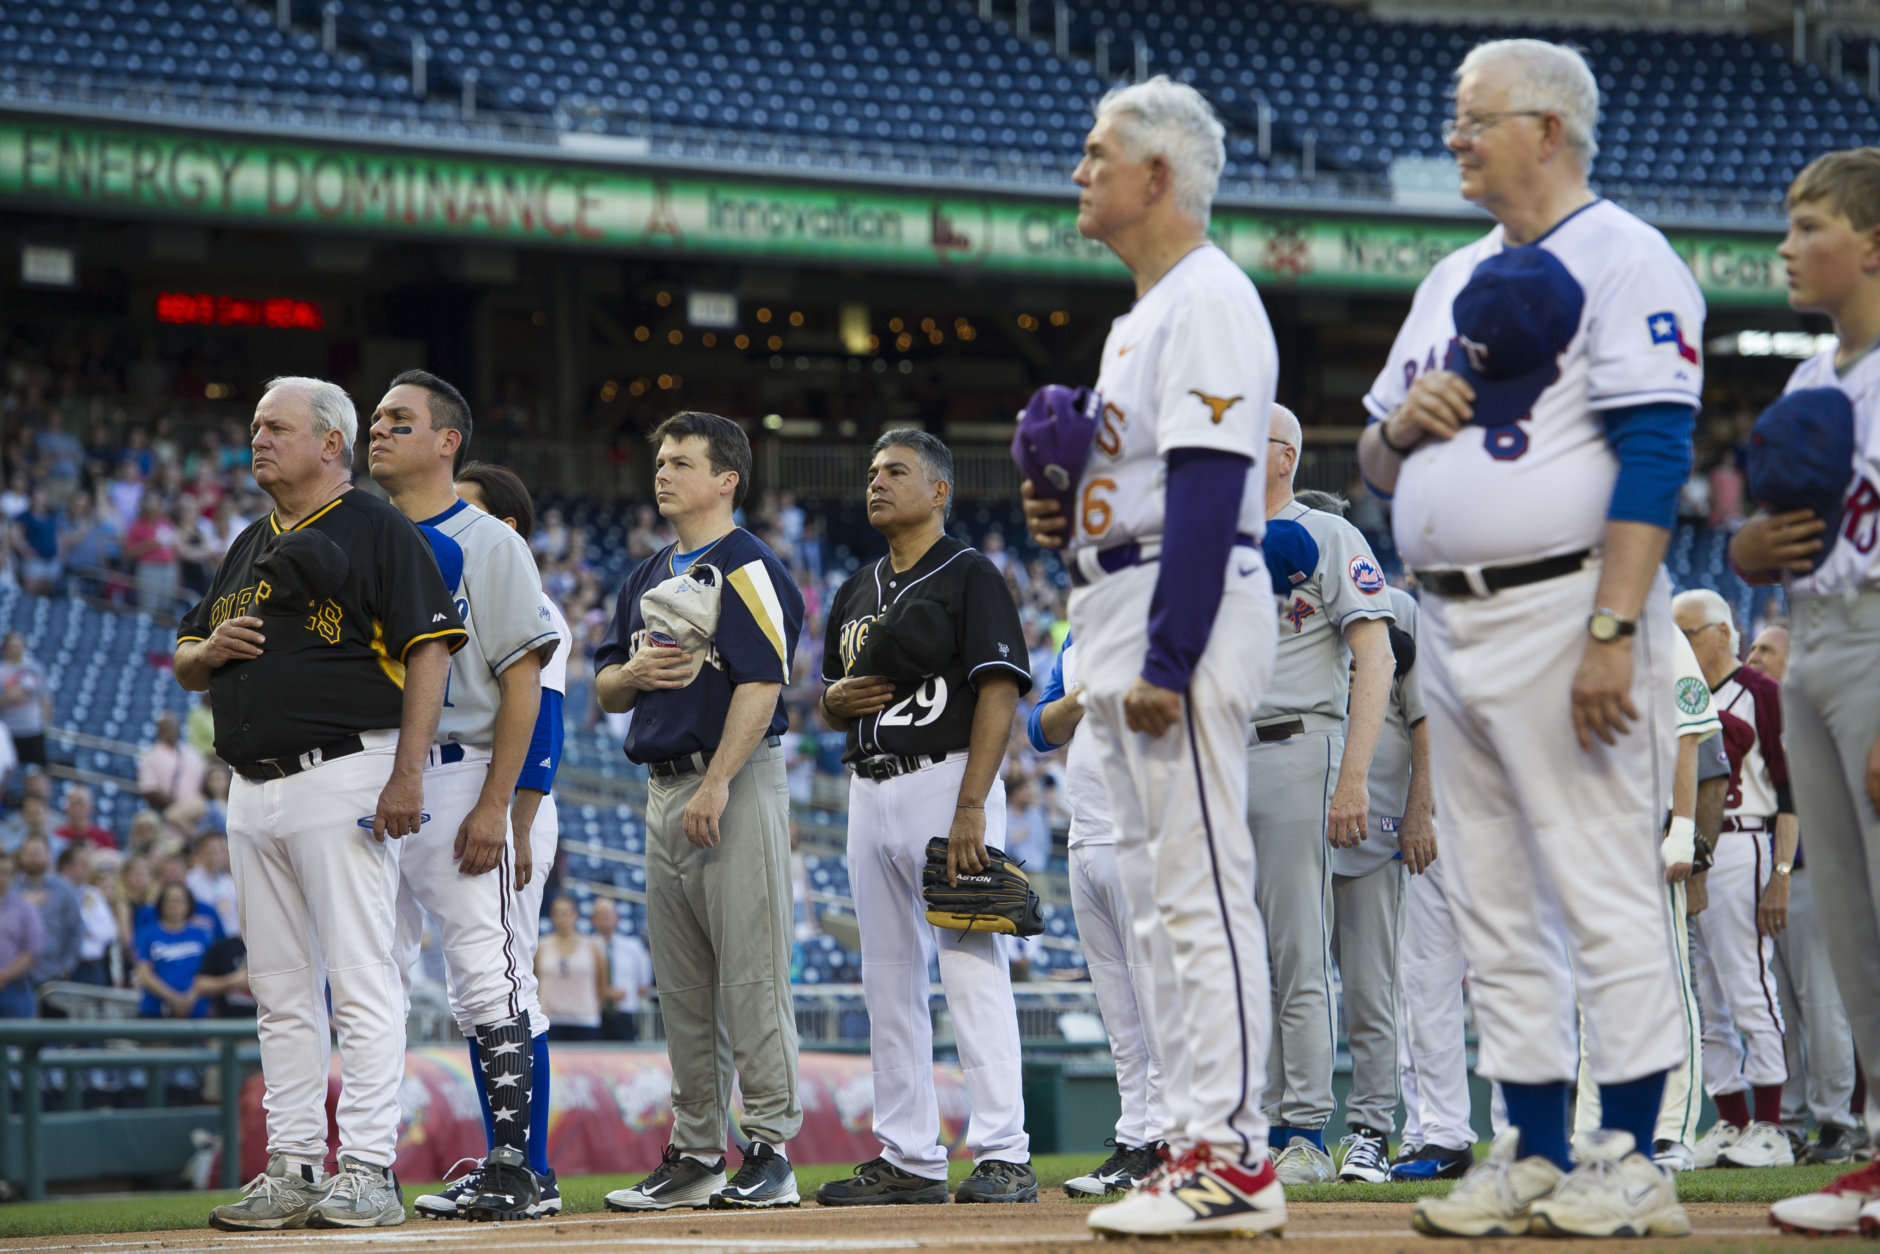 Members of the Democratic and Republican baseball teams stand for the national anthem to start the 57th Congressional Baseball Game at National's Park in Washington, Thursday, June 14, 2018. On June 14, 2017, some Congressional members were victims of a shooting at the baseball field they were practicing on in Alexandria, Va. (AP Photo/Cliff Owen)